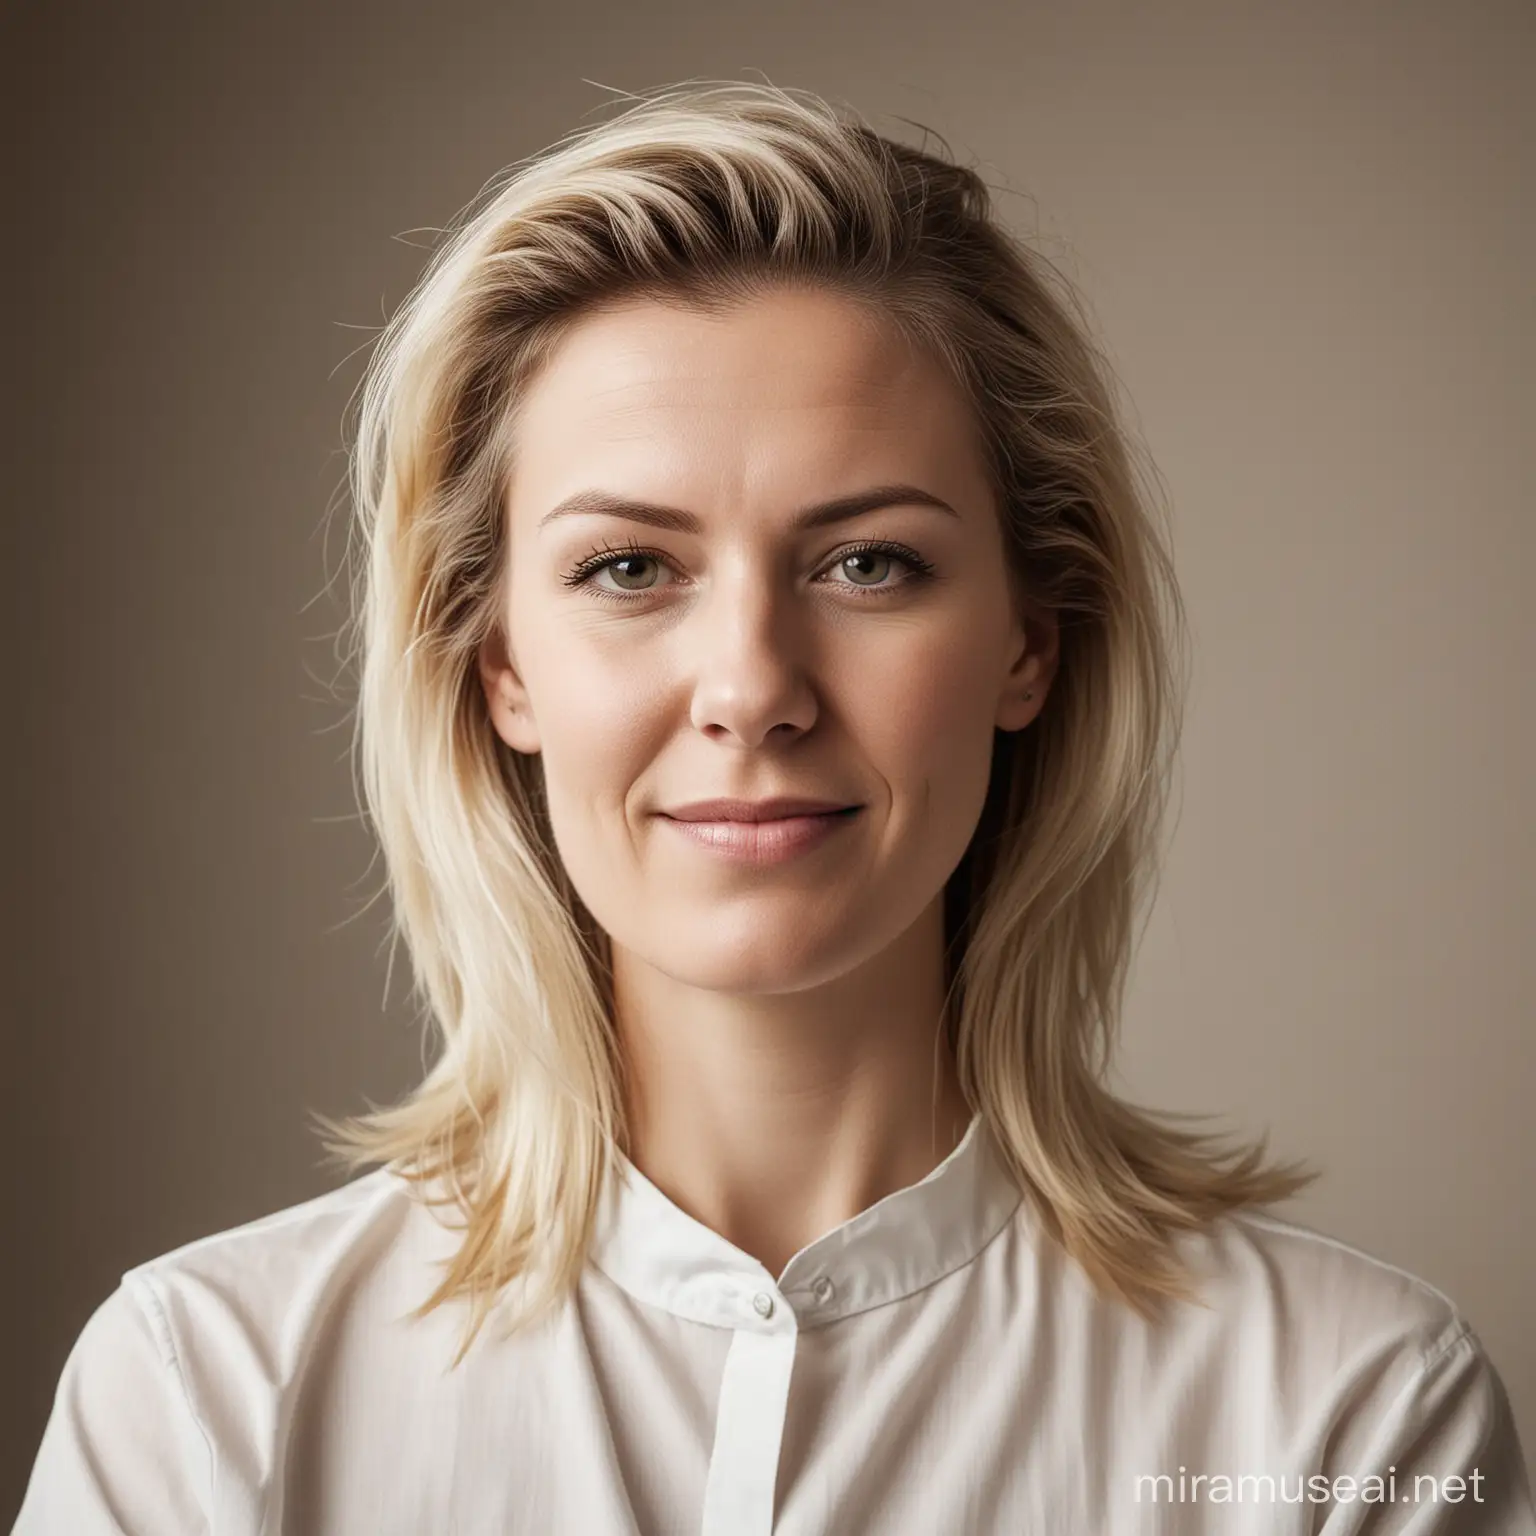 a portrait photograph of a swedish femalee hairdresser in her 30s.
